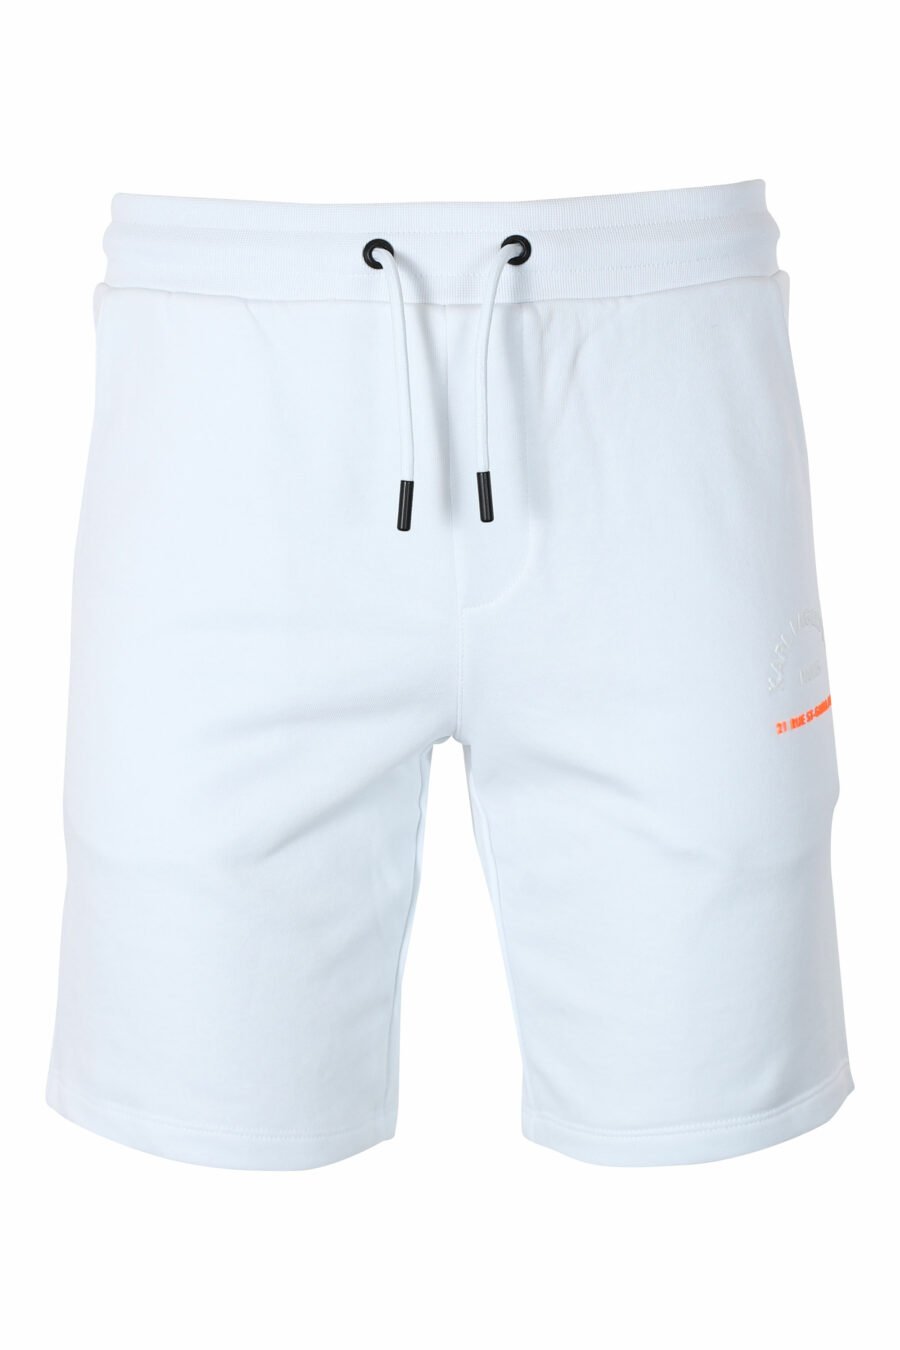 Tracksuit bottoms white short with orange "rue st guillaume" minilogue - IMG 9559